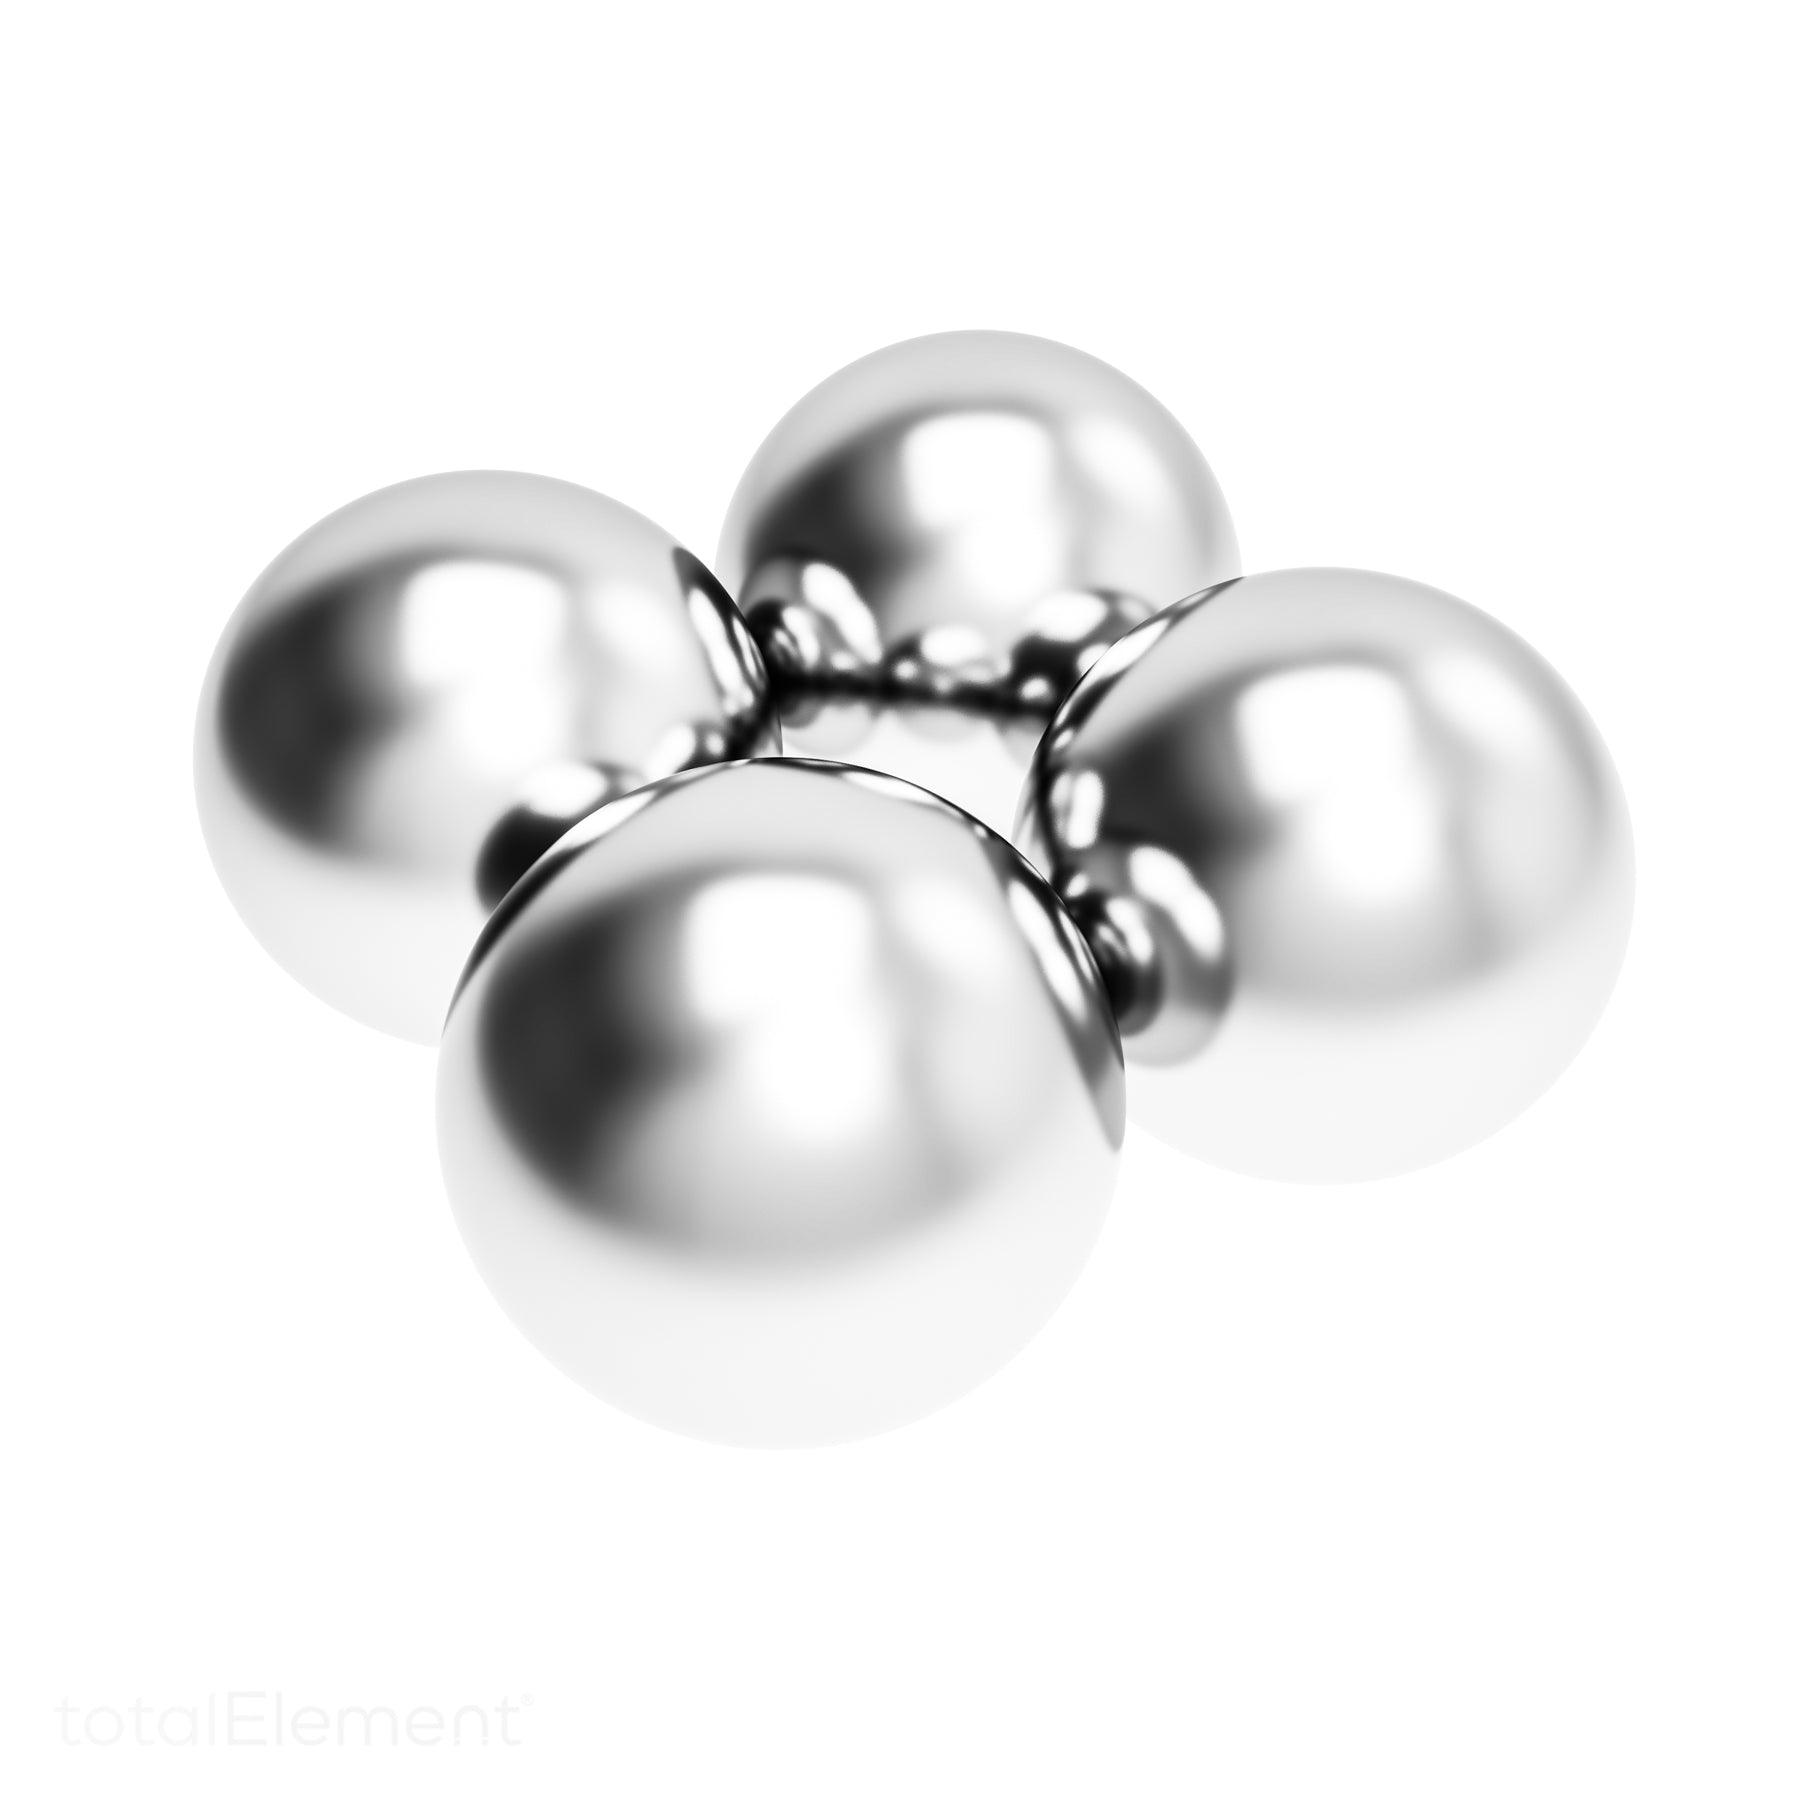 Powerful and Industrial small magnet ball 